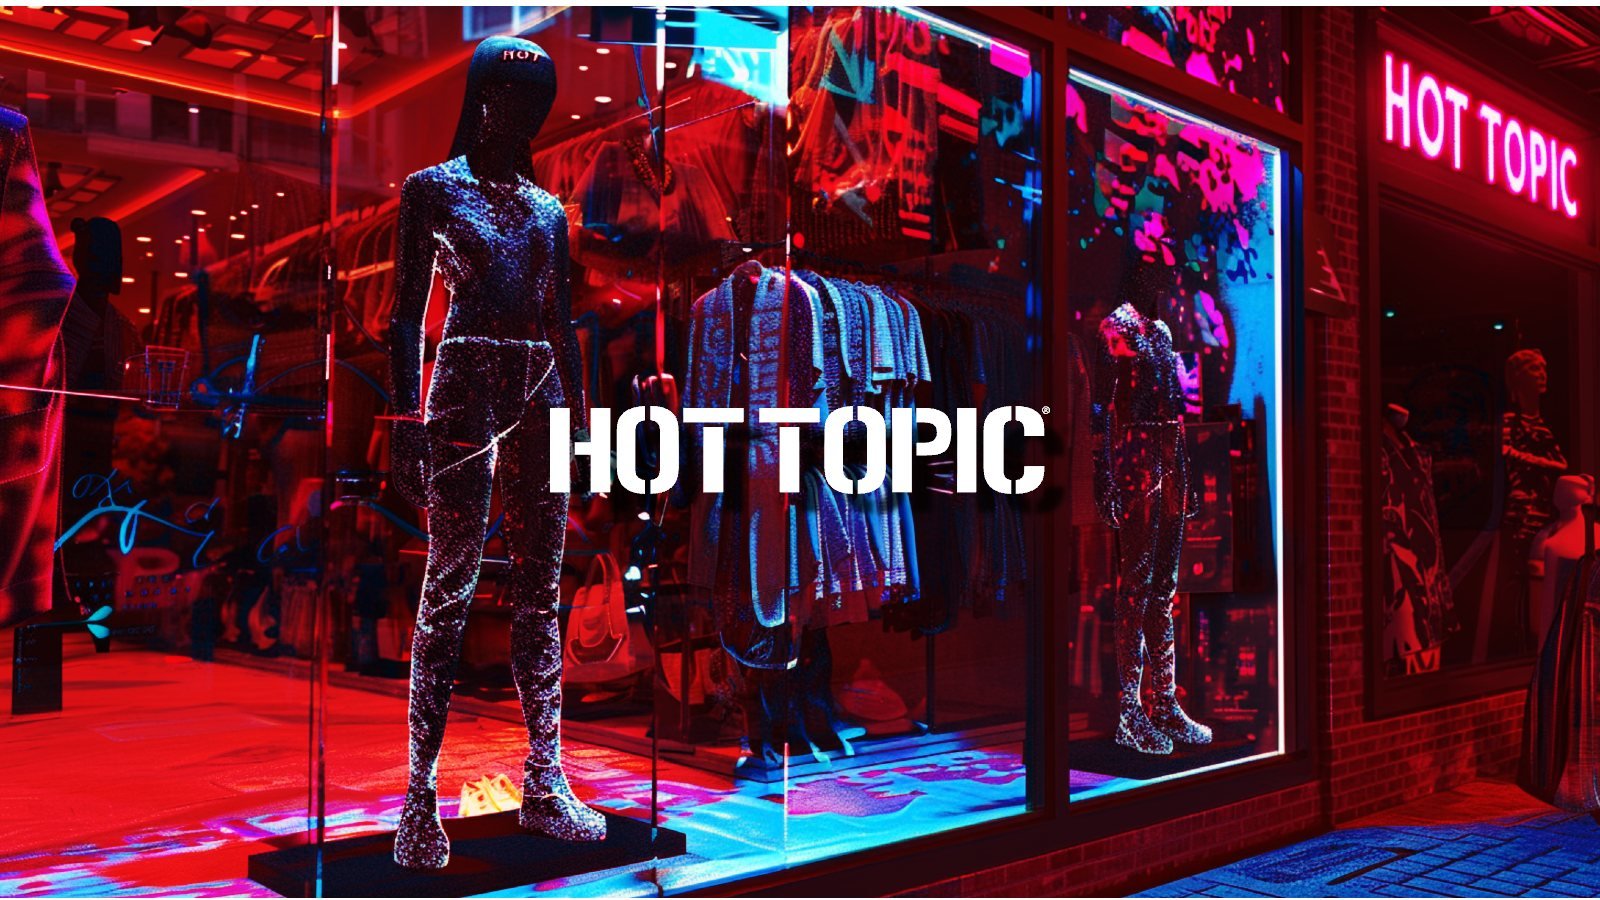 Retail chain Hot Topic hit by new credential stuffing attacks